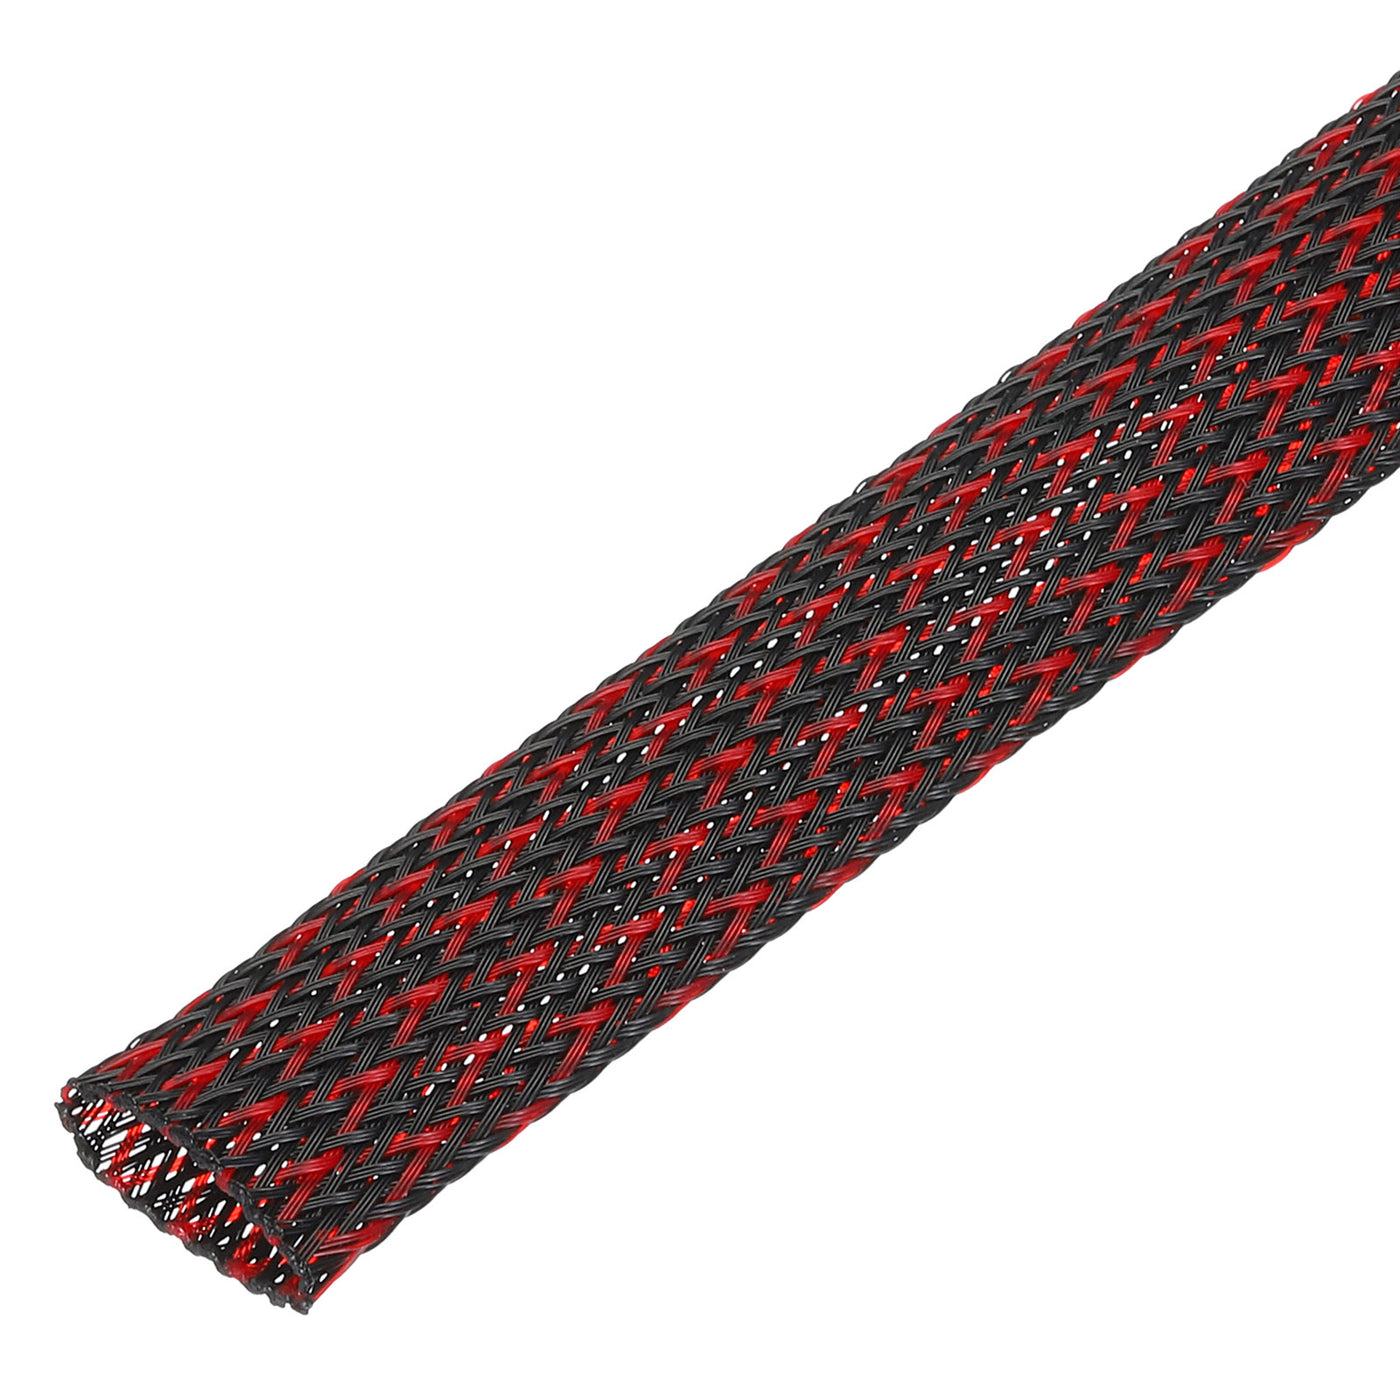 uxcell Uxcell Insulation Braid Sleeving, 9.84 Ft-25mm High Temperature Sleeve Black Red